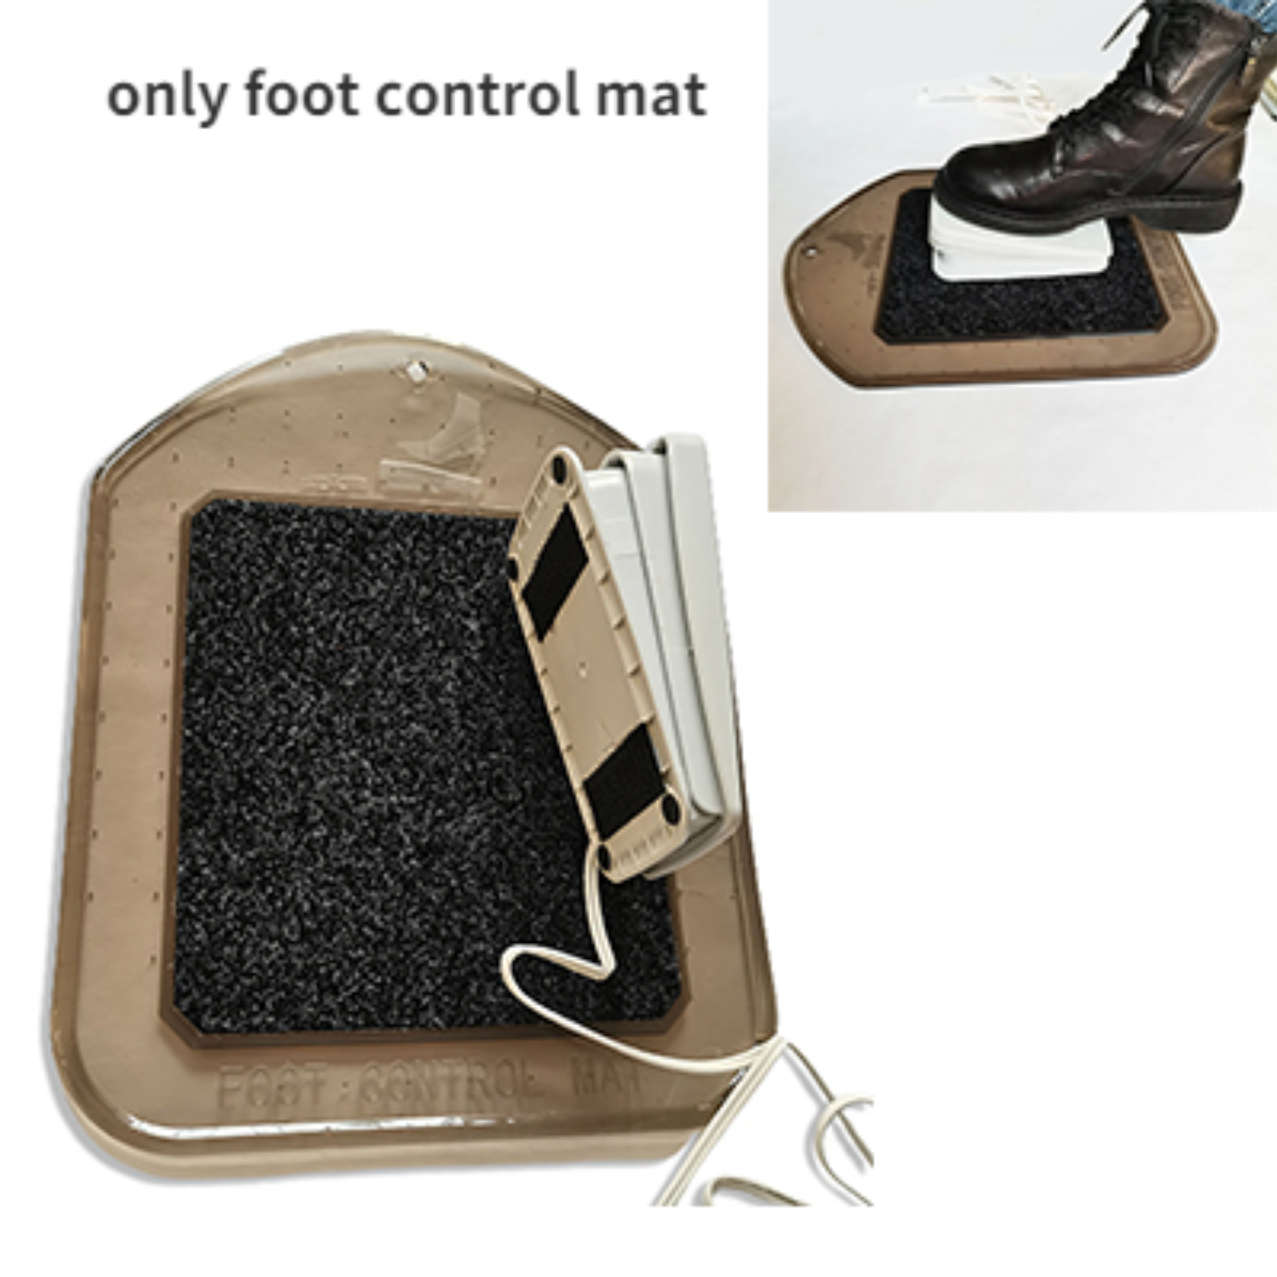 Foot Control Pedal with Cord #4123141-01 Fits Many Husqvarna Viking Sewing  Machines & Serger Equiv Control Pedal Mat - AliExpress